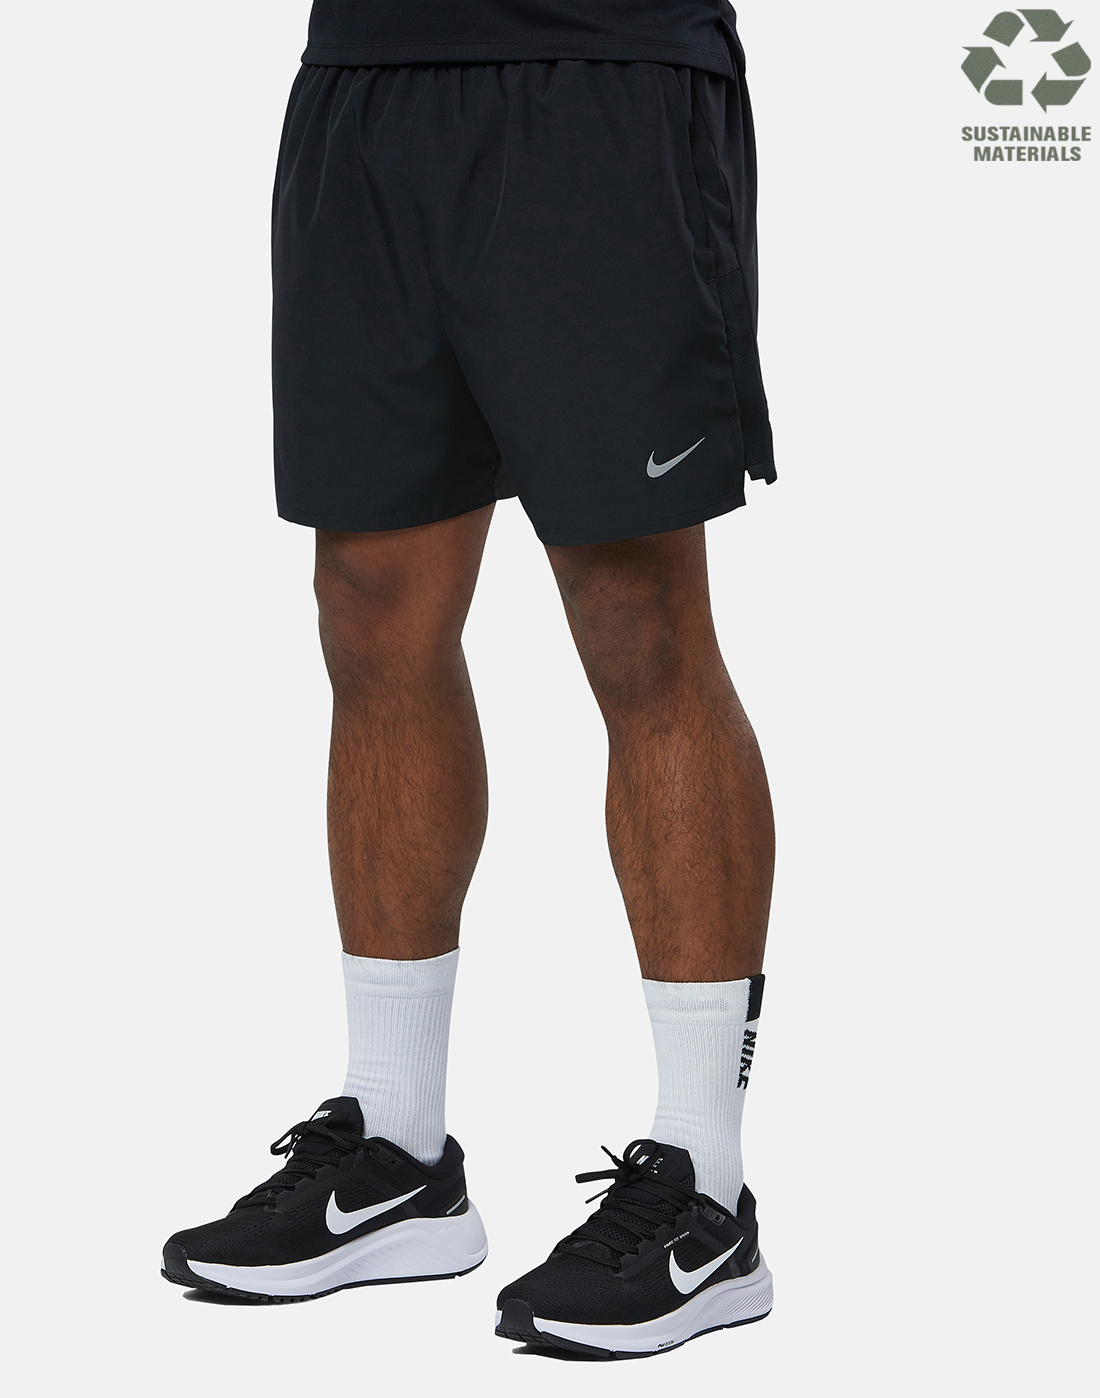 Nike Mens Challenger 7 Inch 2in1 Shorts - Black | Life Style Sports IE